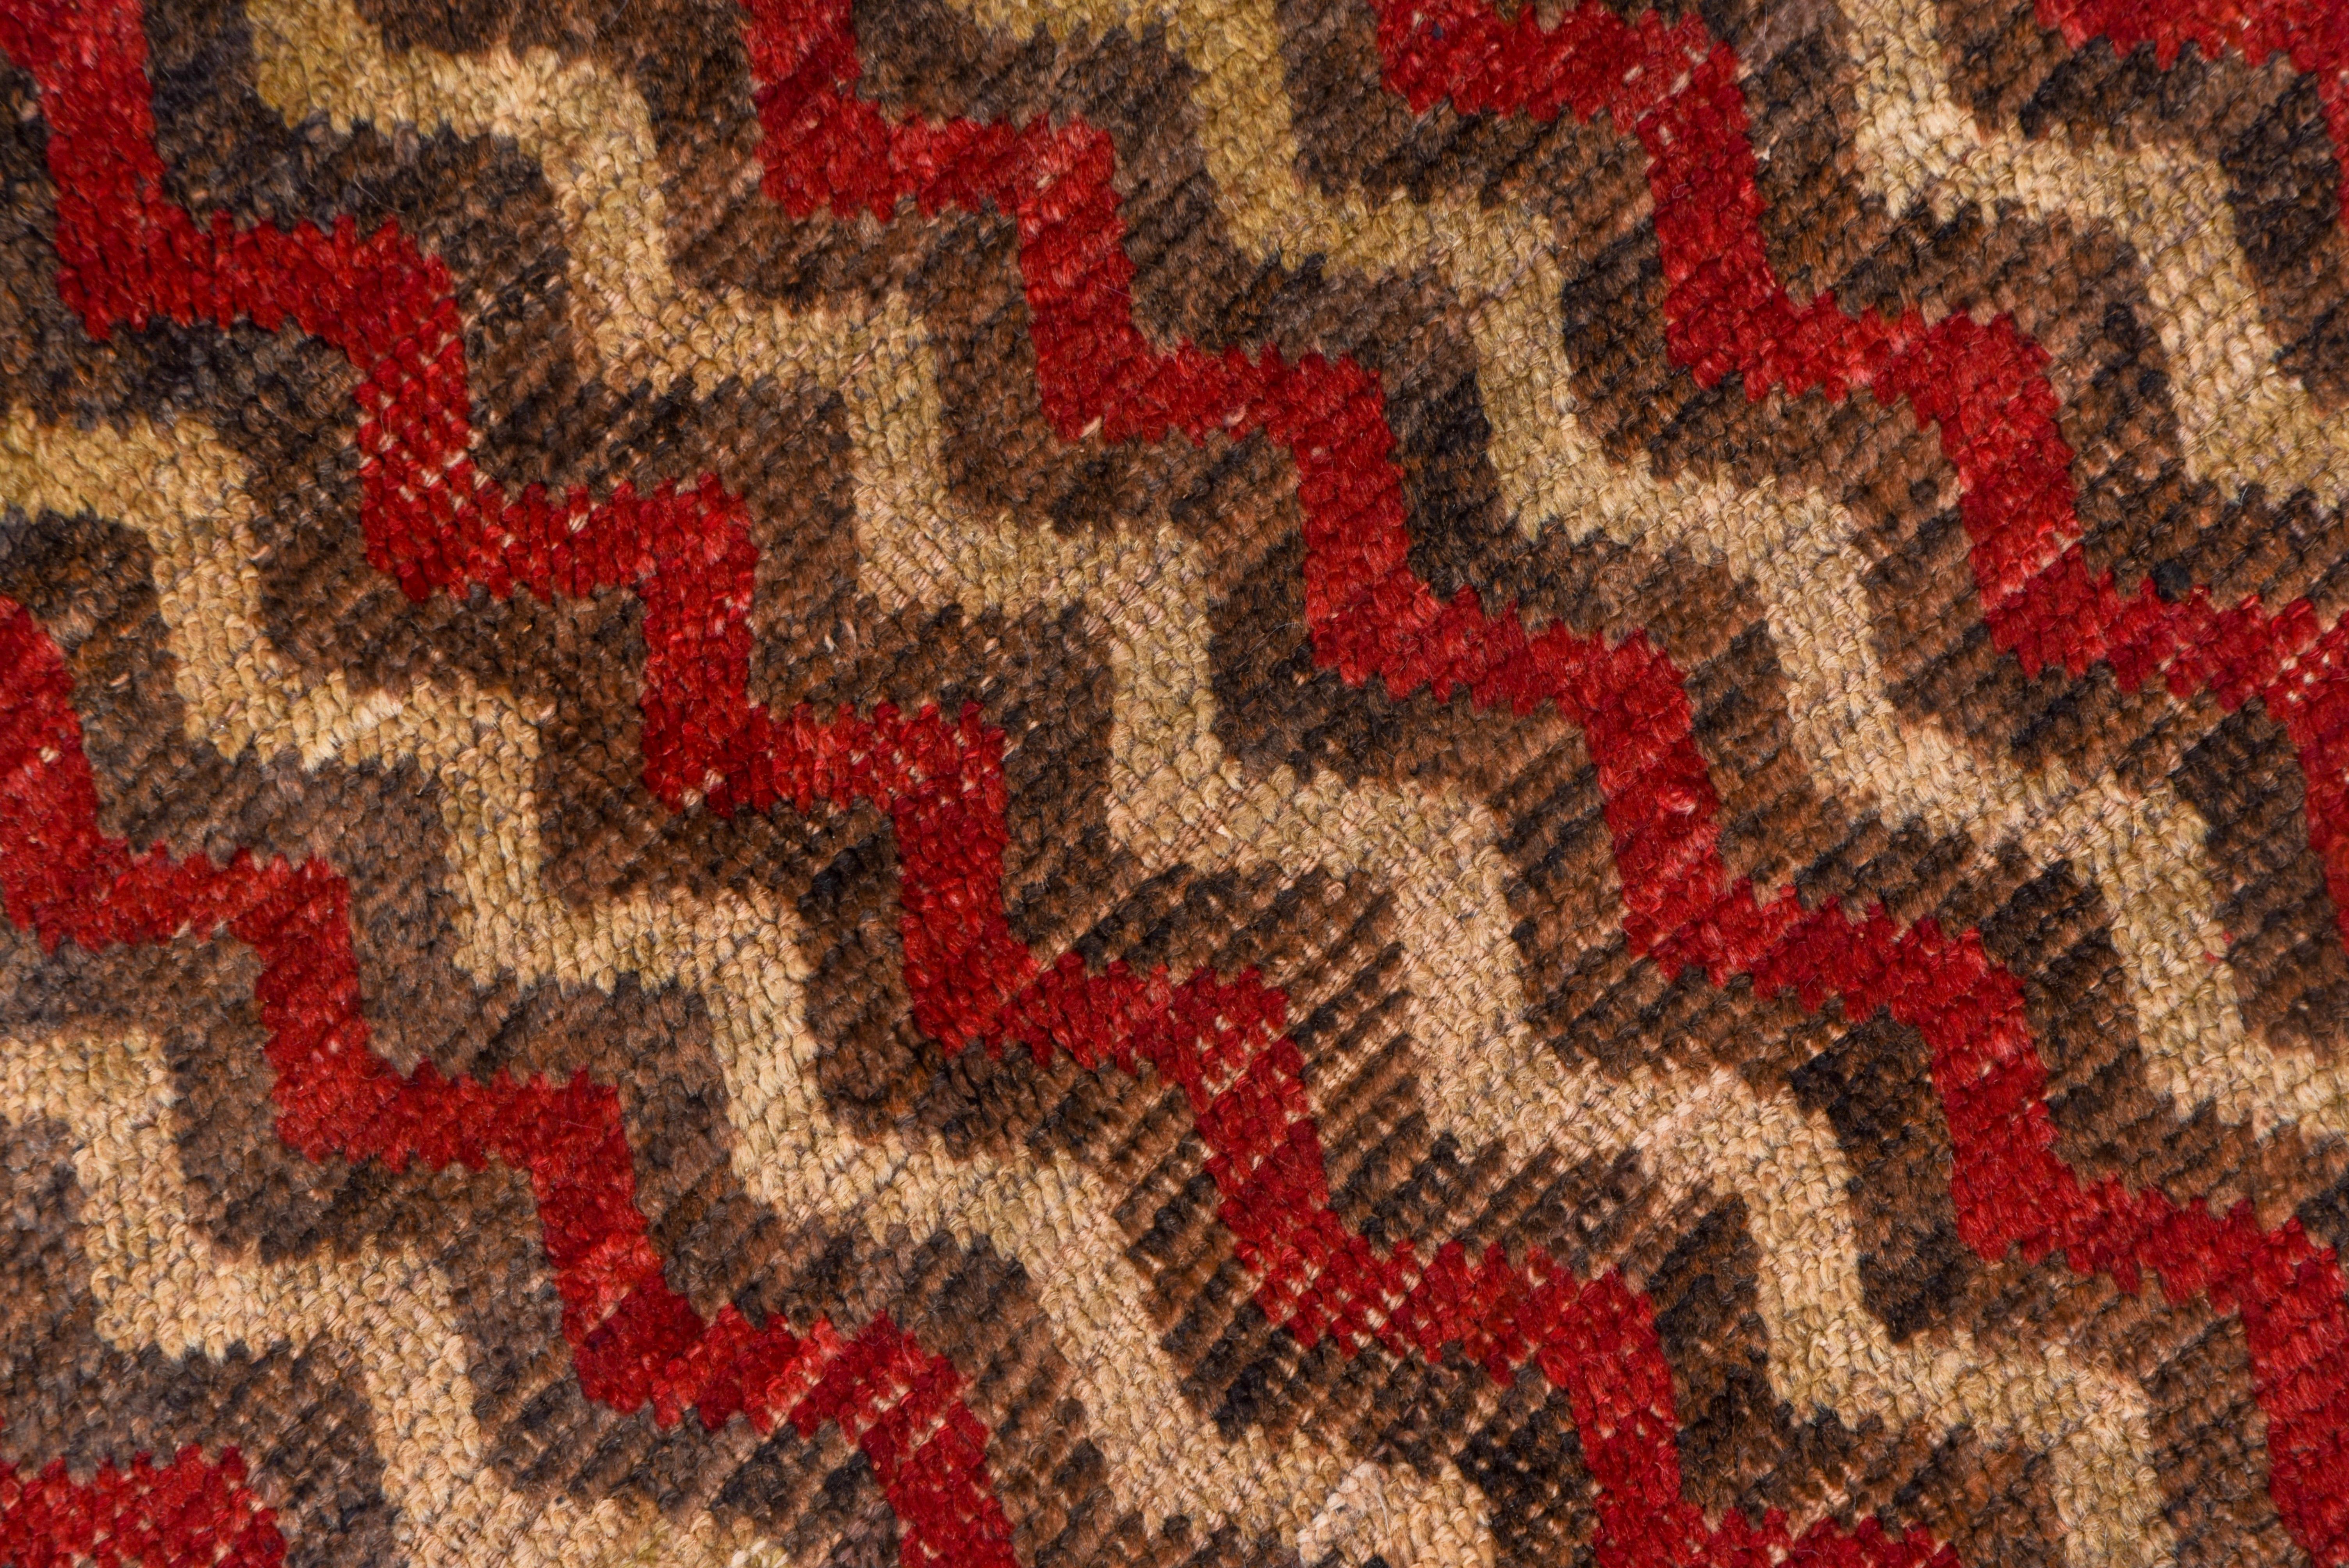 This bi tonal red and cream kellegi format rug shows an end-to-end, border less pattern. Probably central Anatolian. Dimensions are adjustable. Abstract and ultra-modern.